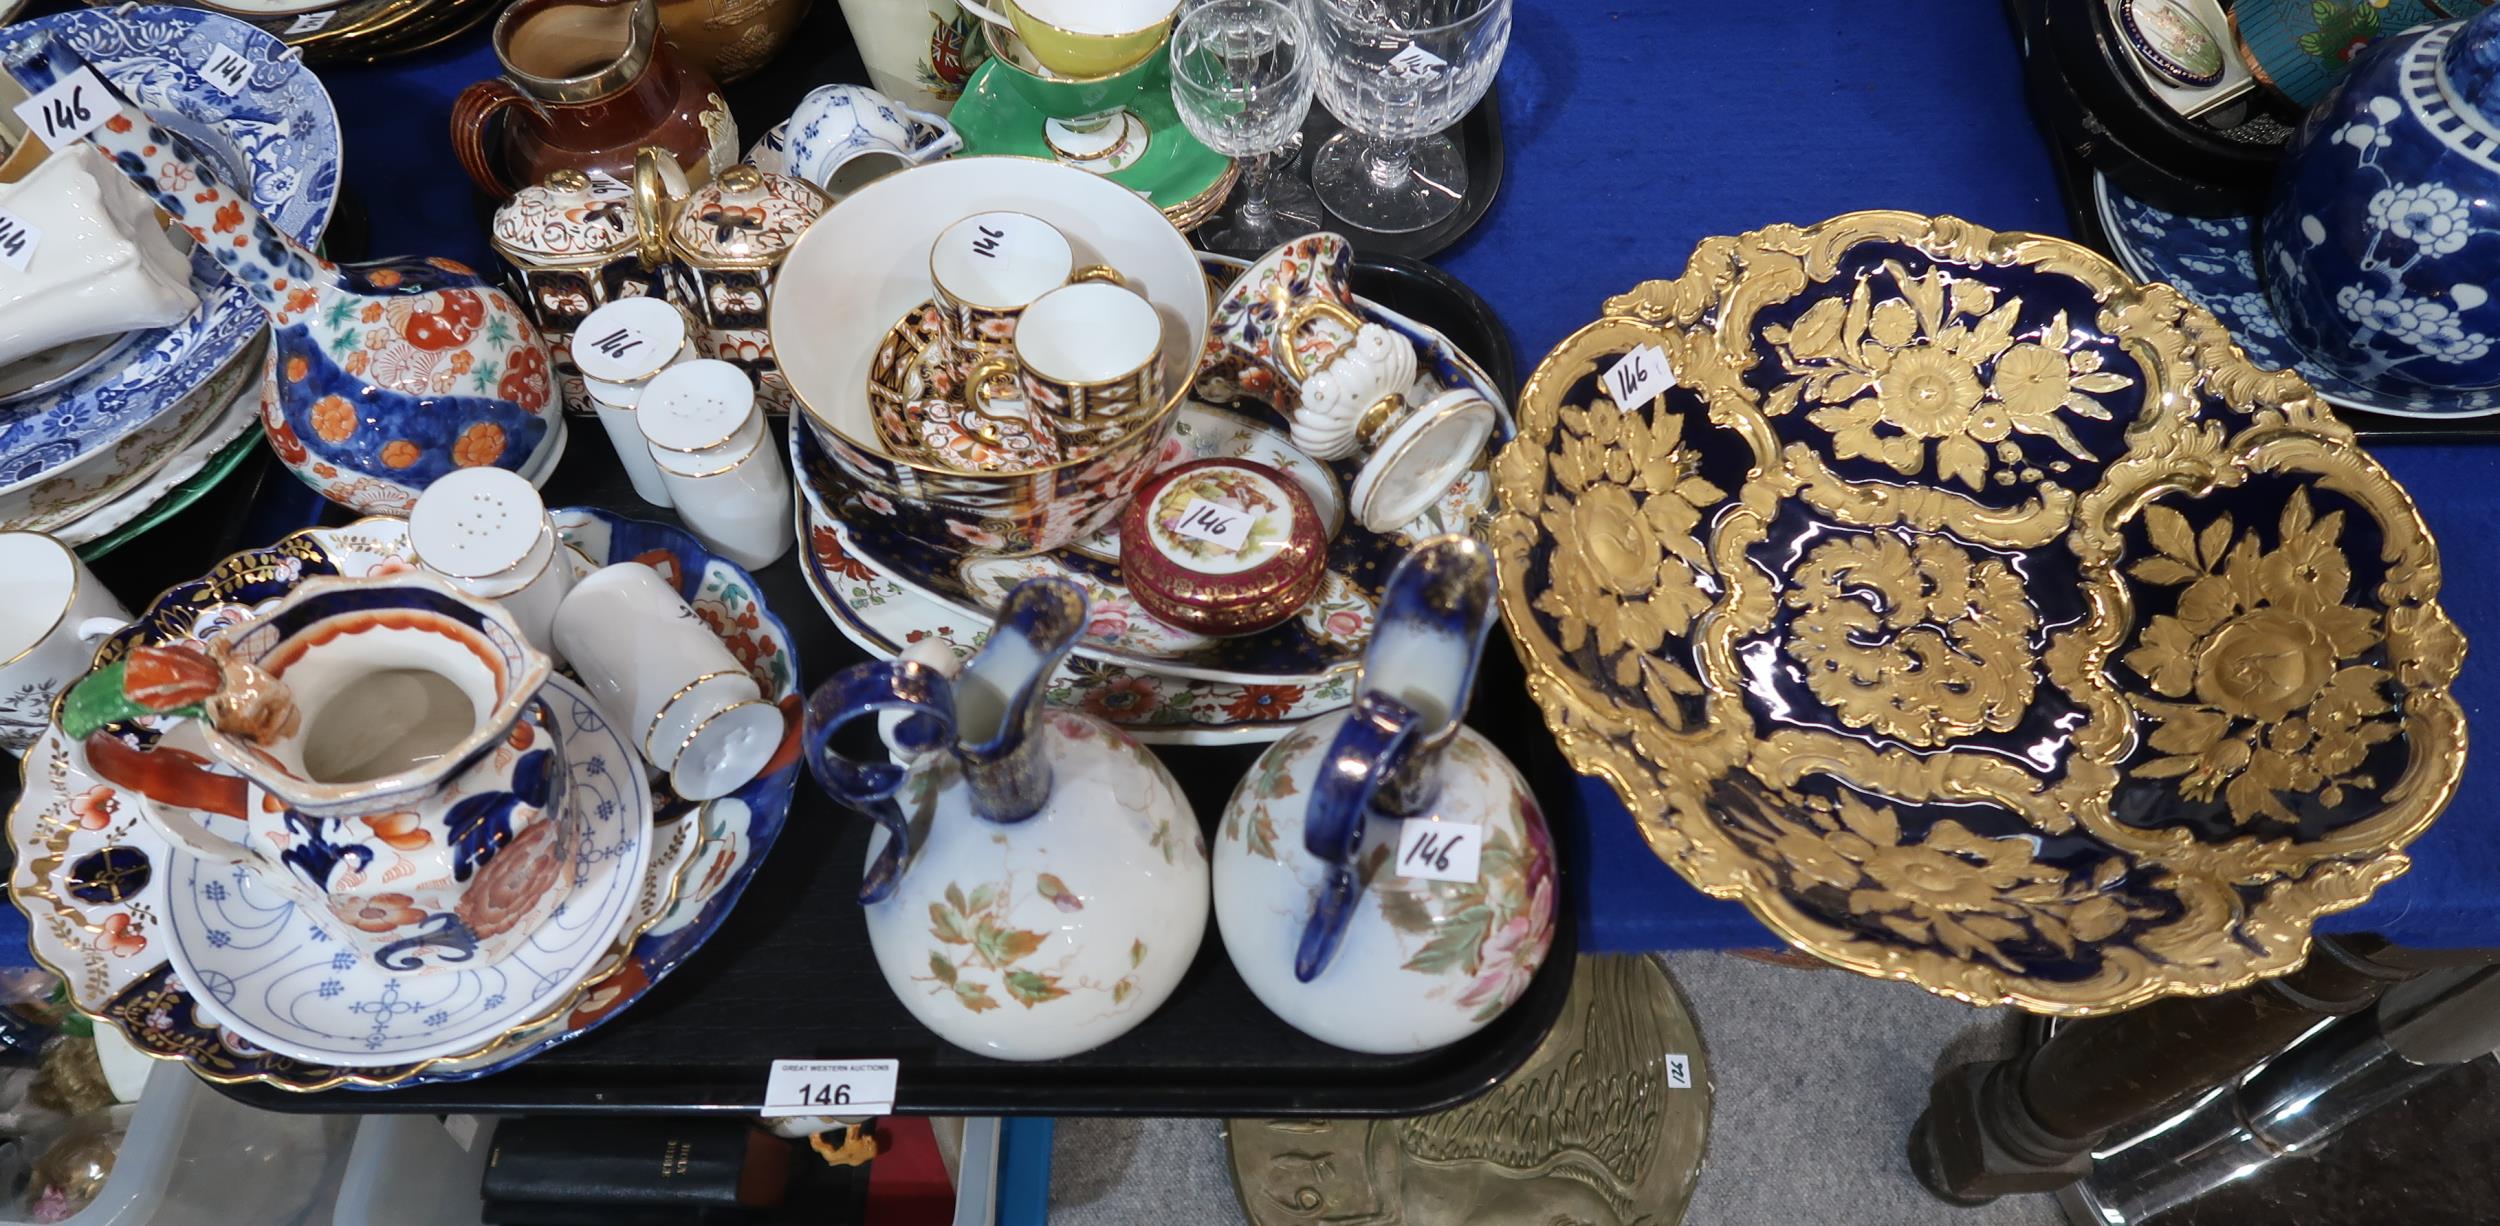 Two Royal crown Derby coffee cans and saucers, a large bowl, other imari pattern wares, a Meissen